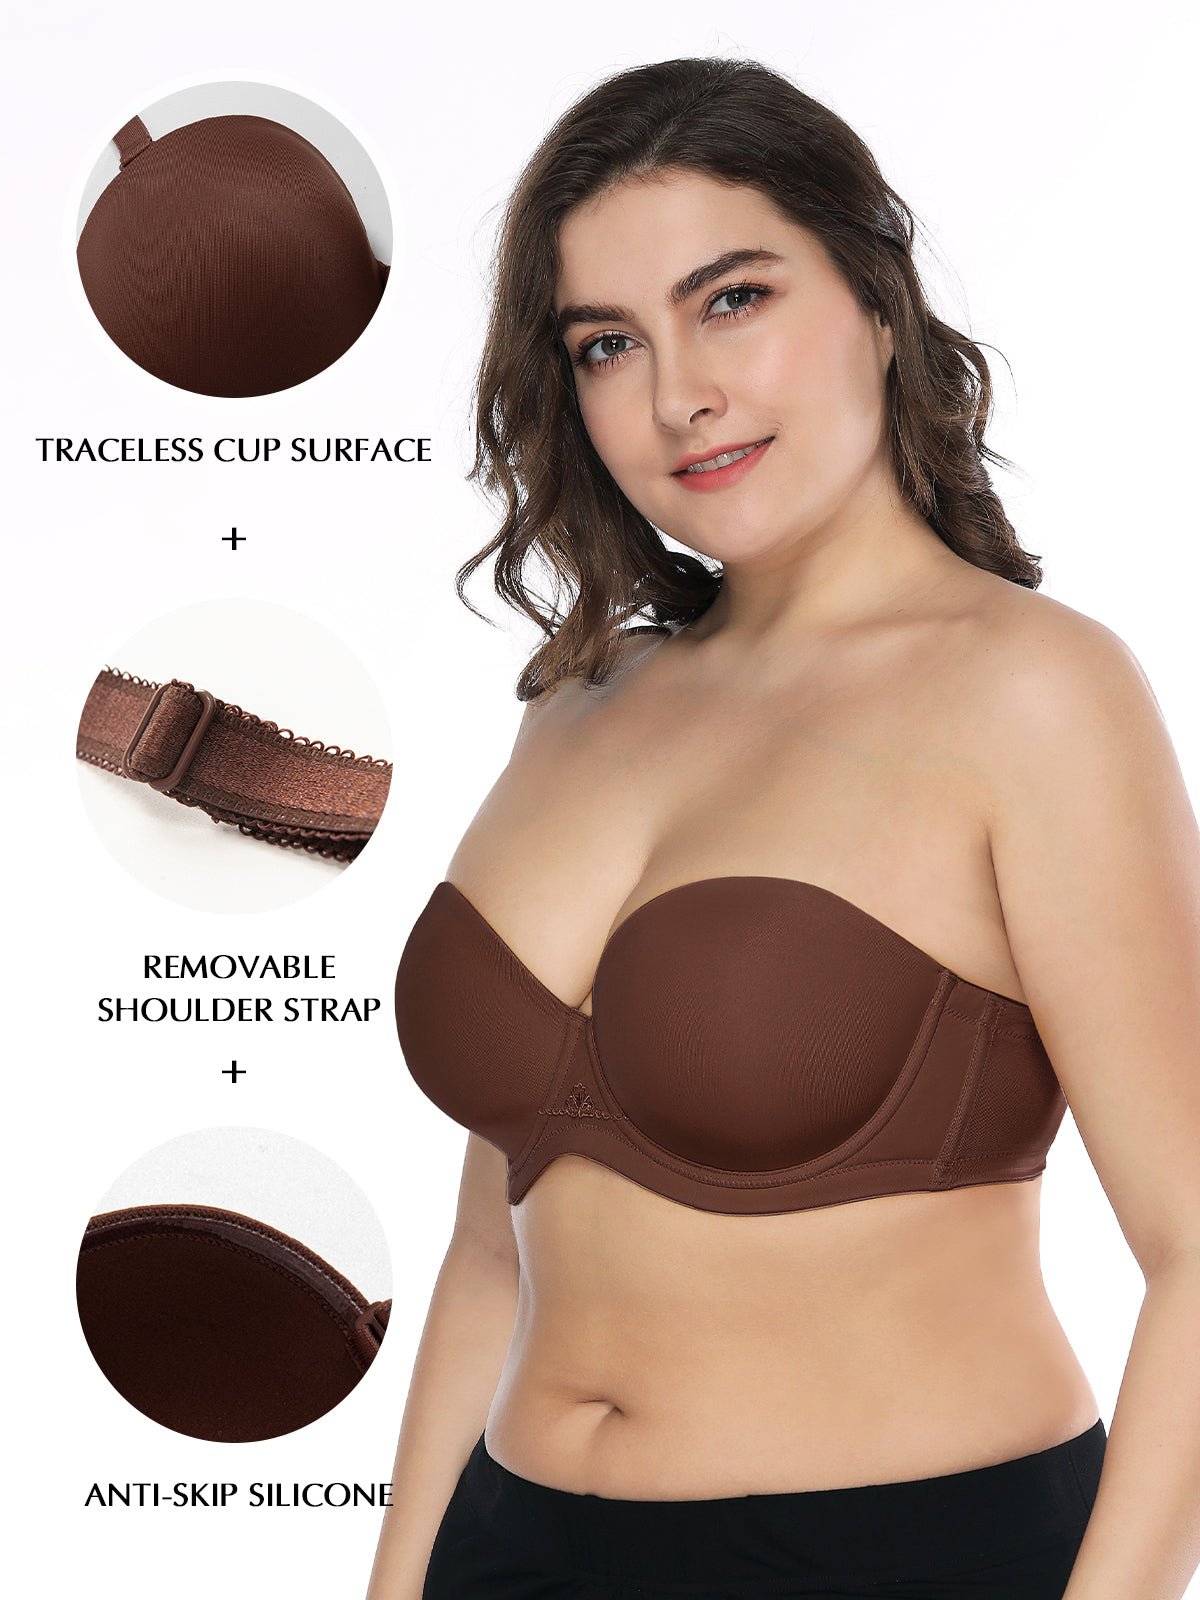 Full Busted Figure Types in 34G Bra Size Chocolate Contour